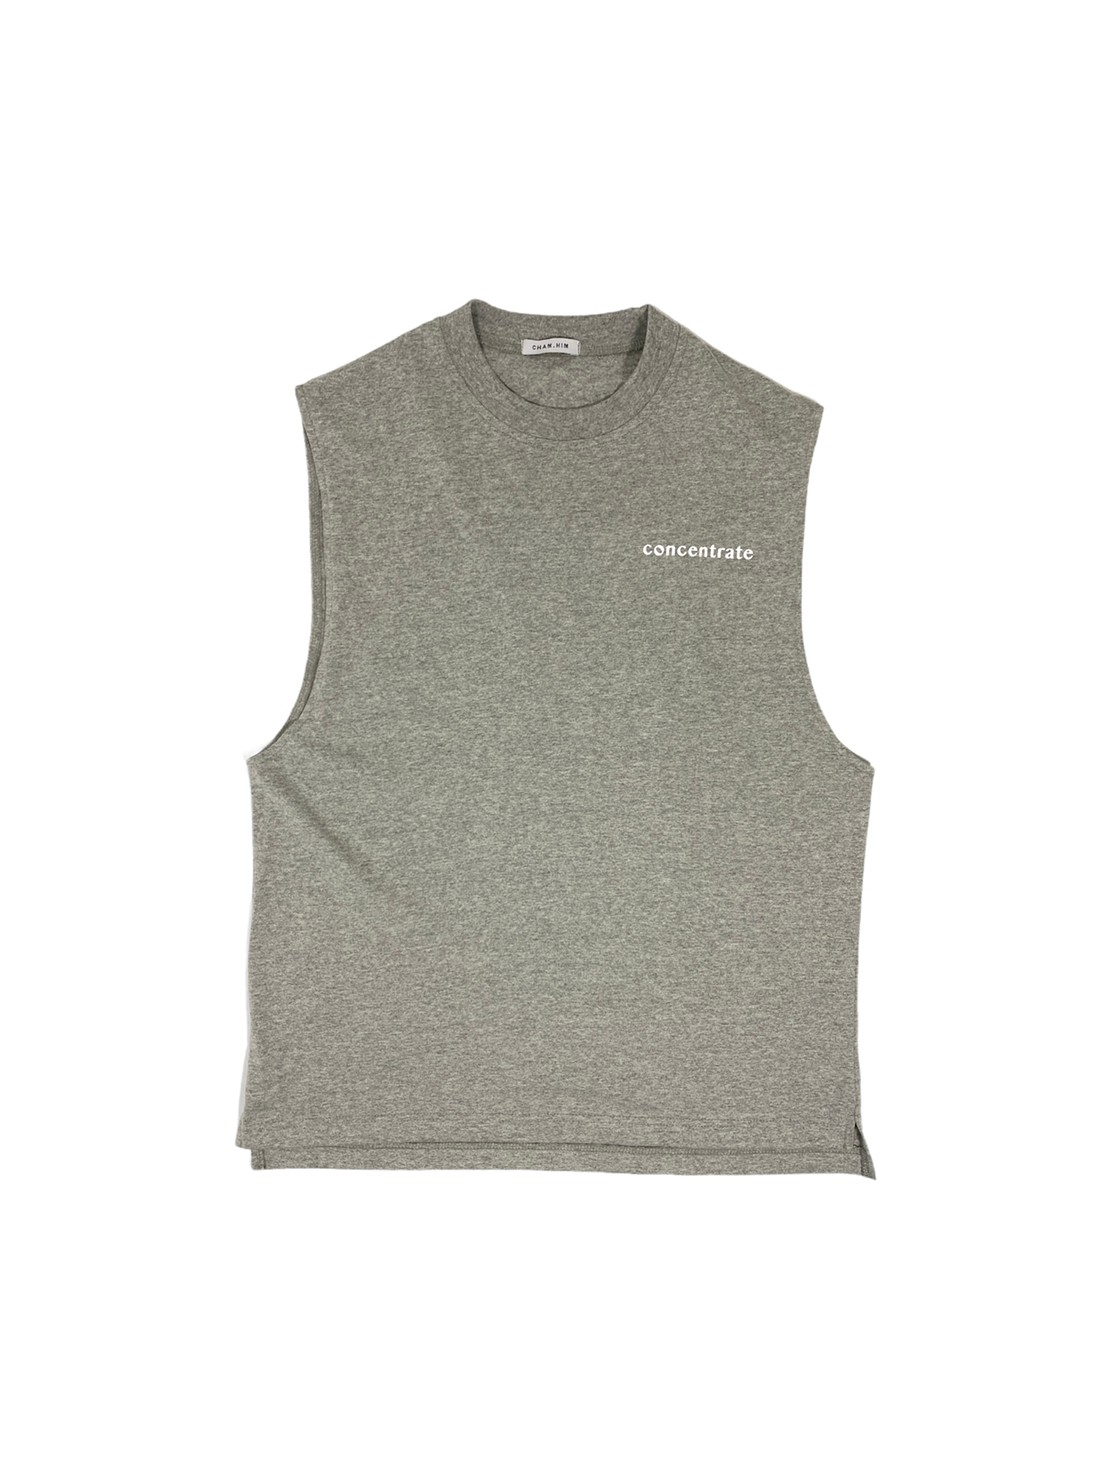 Concentrate Sleeveless Tee